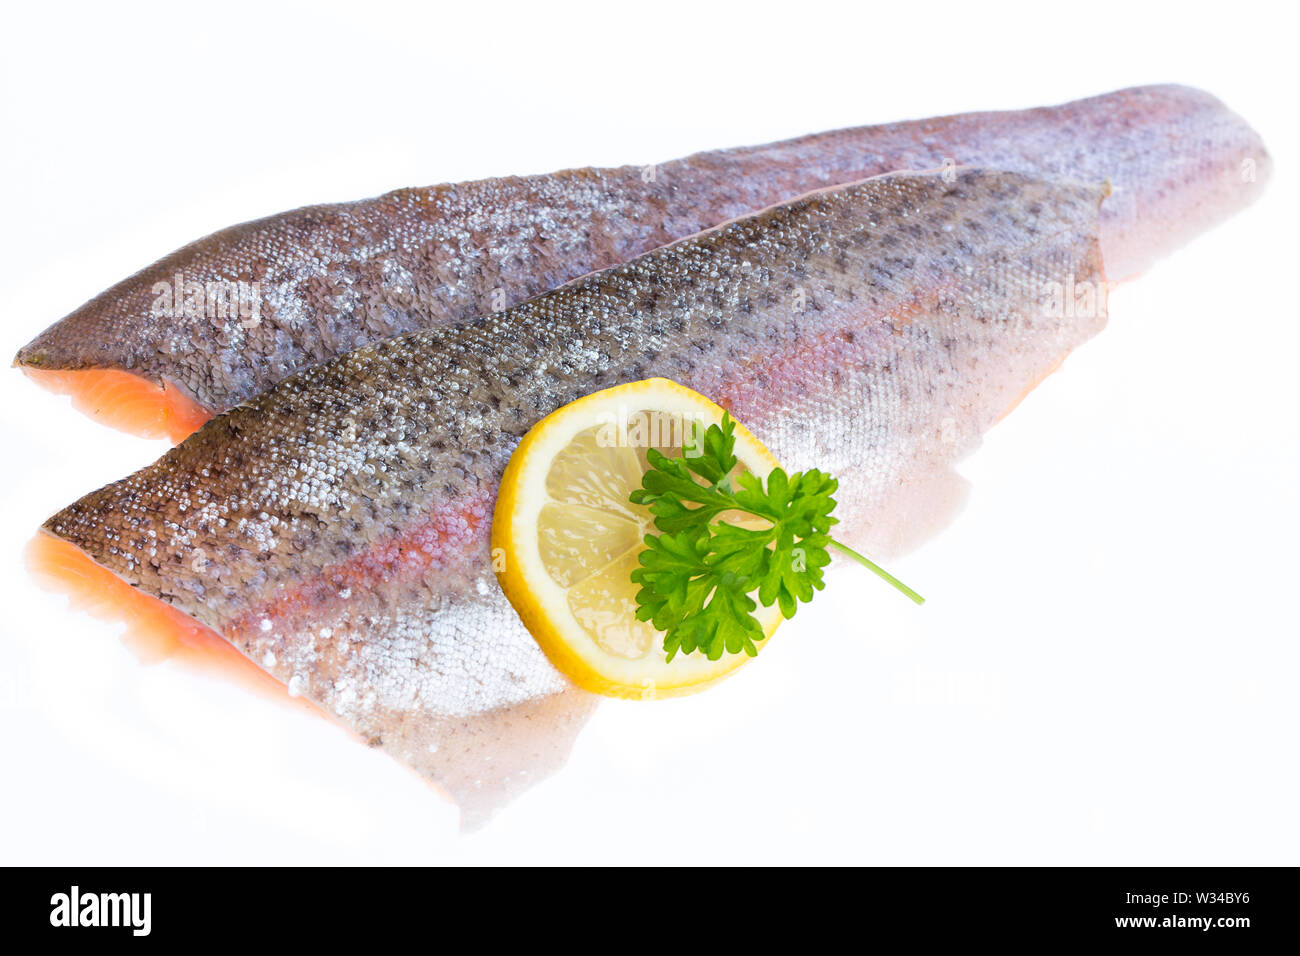 Two filets of salmon trout with a slice of lemon Stock Photo